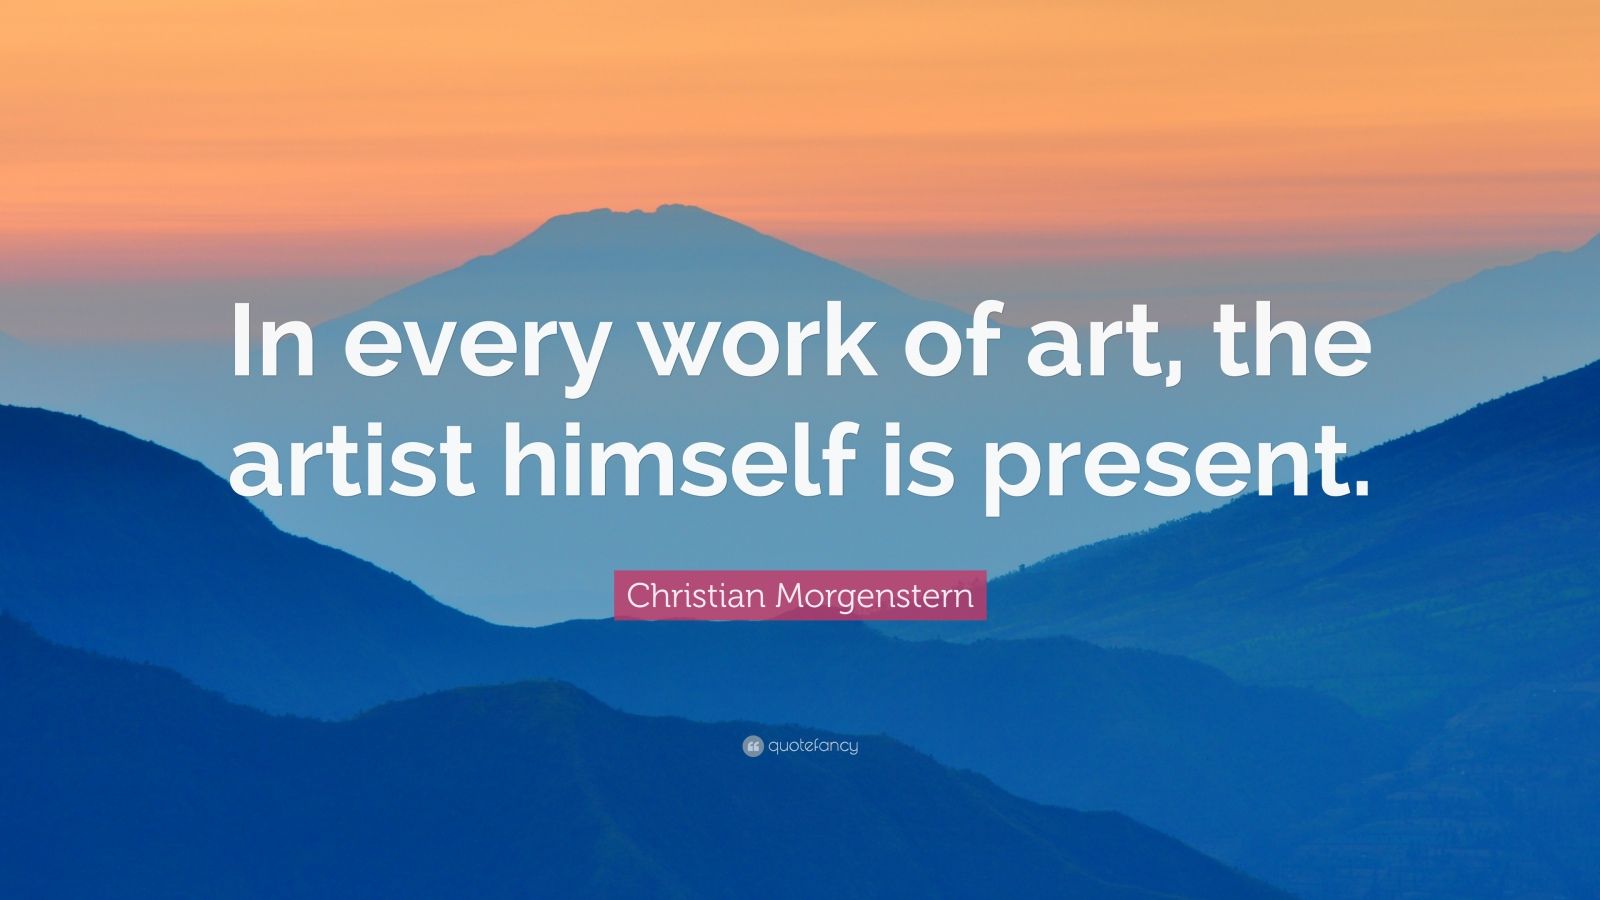 Christian Morgenstern Quote: “In every work of art, the artist himself